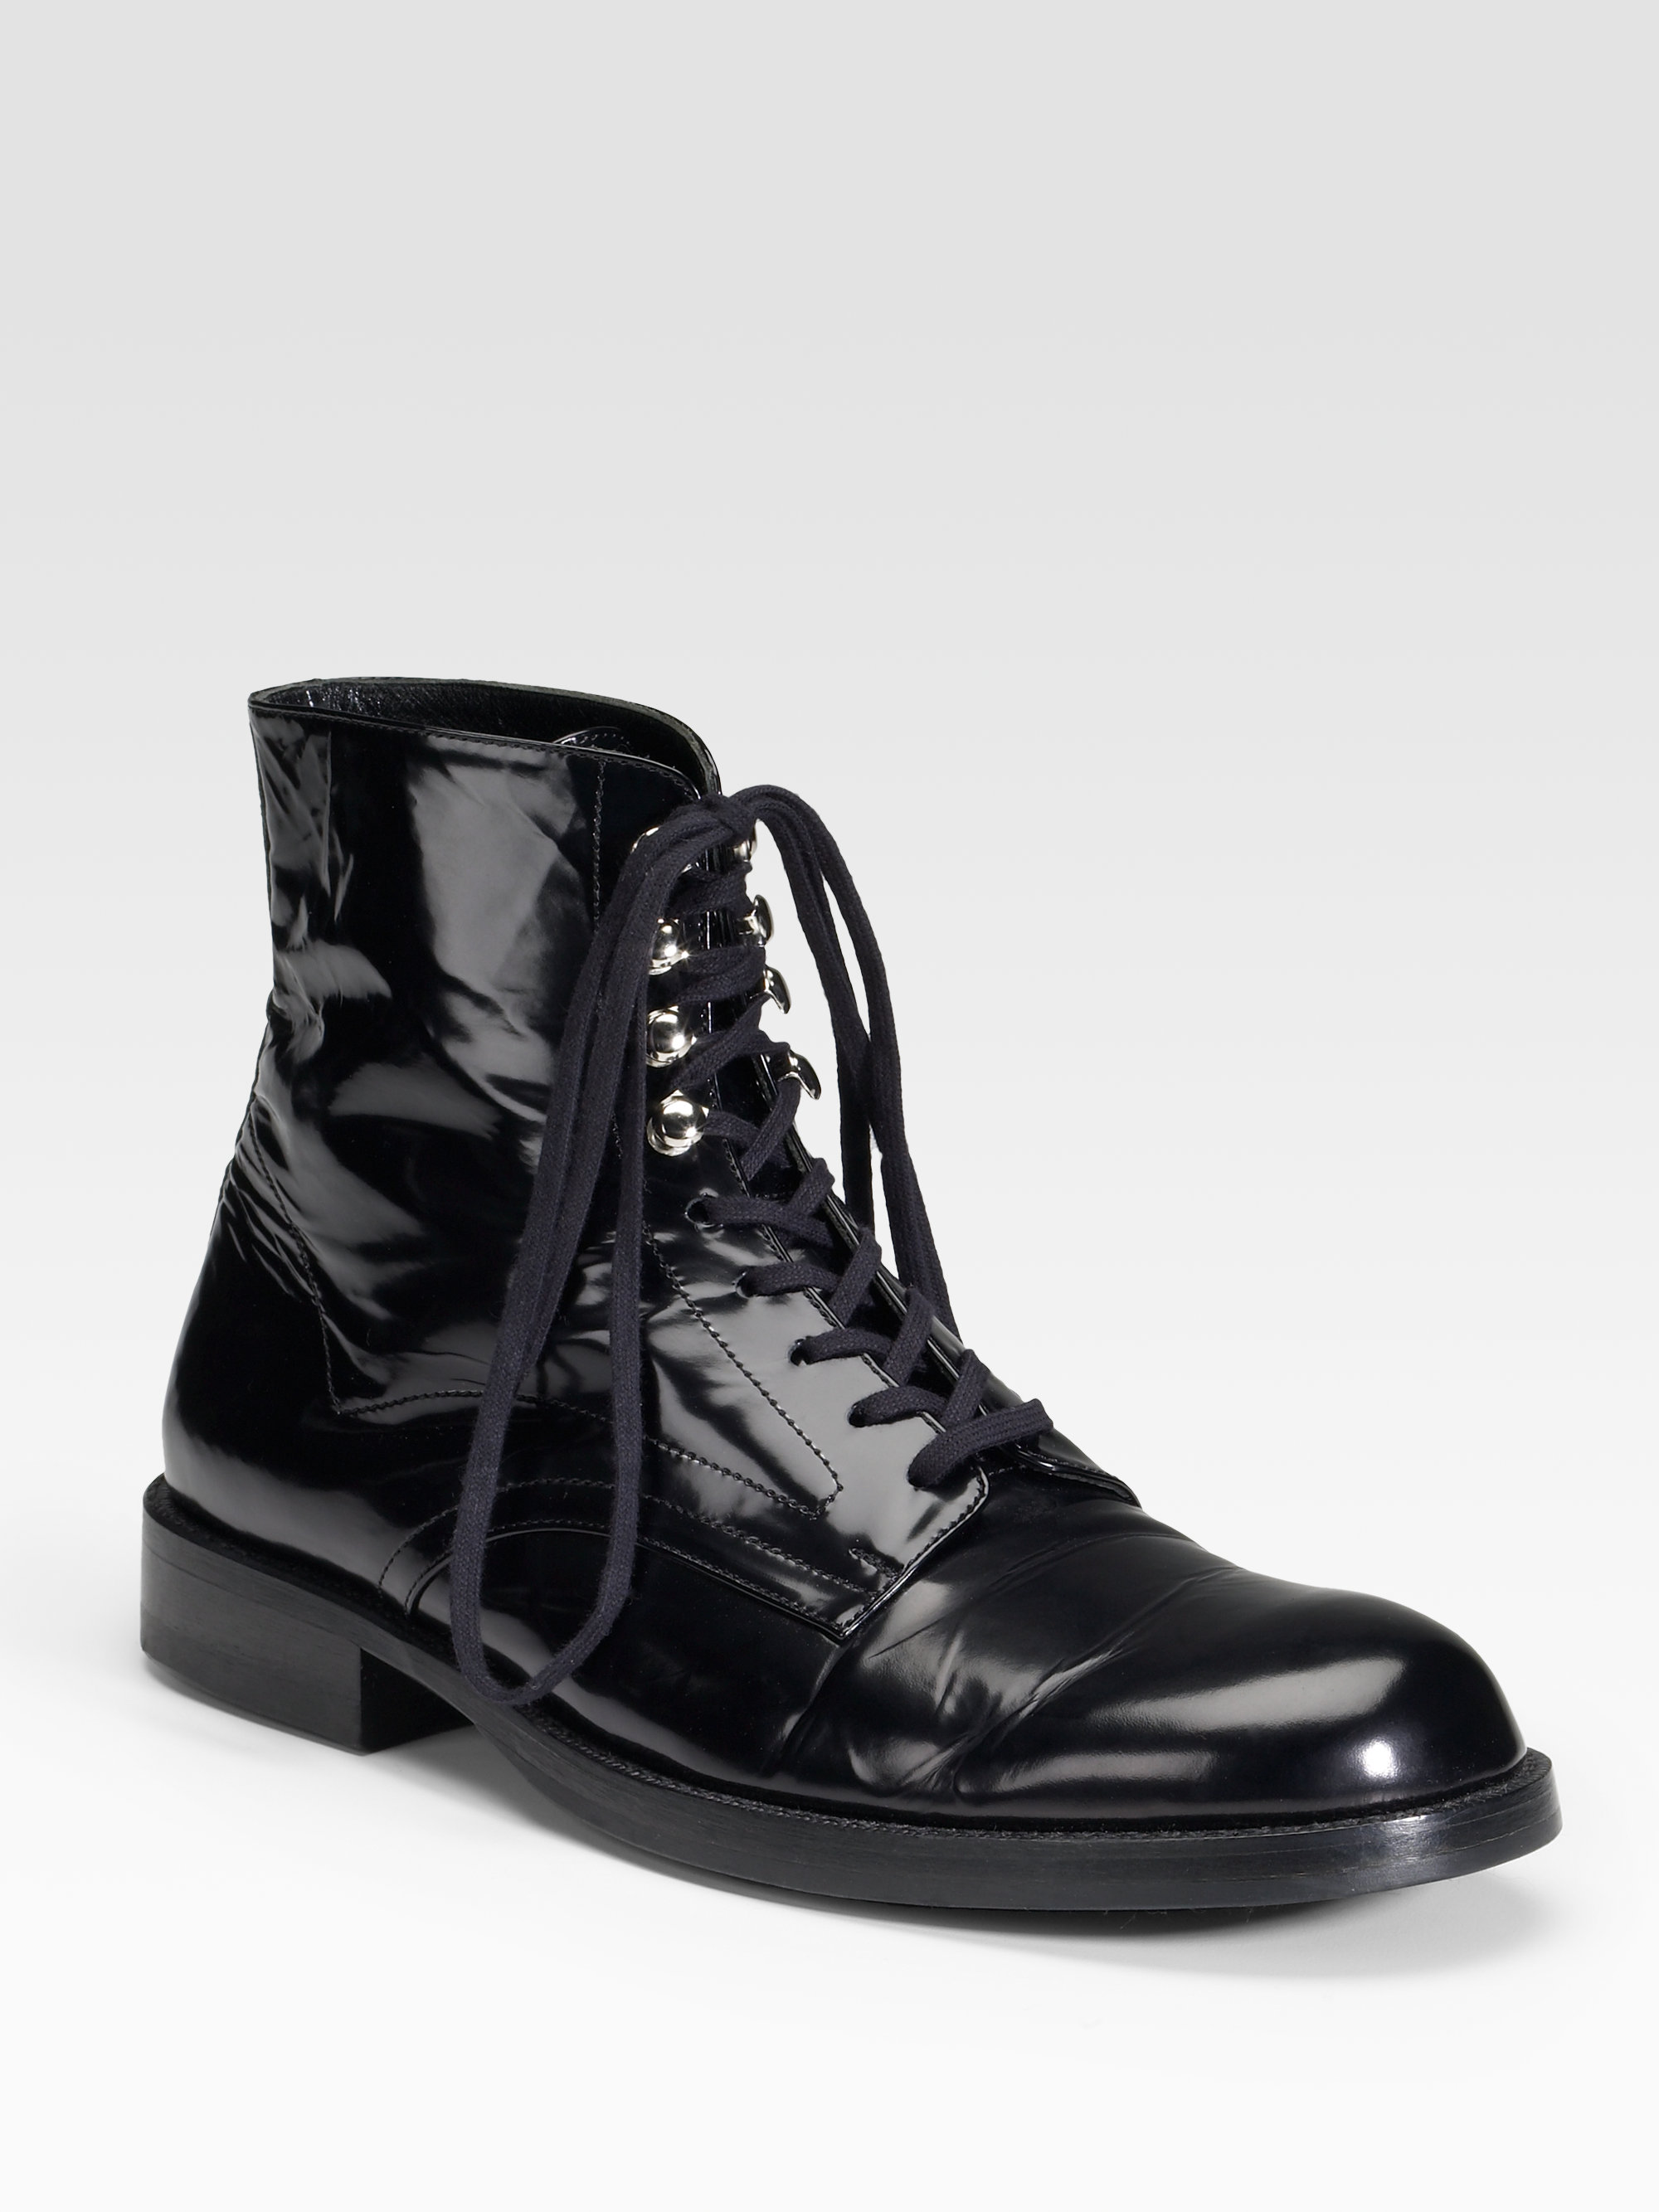 Junya Watanabe Flat Lace Up Shiny Leather Ankle Boots In Black Lyst